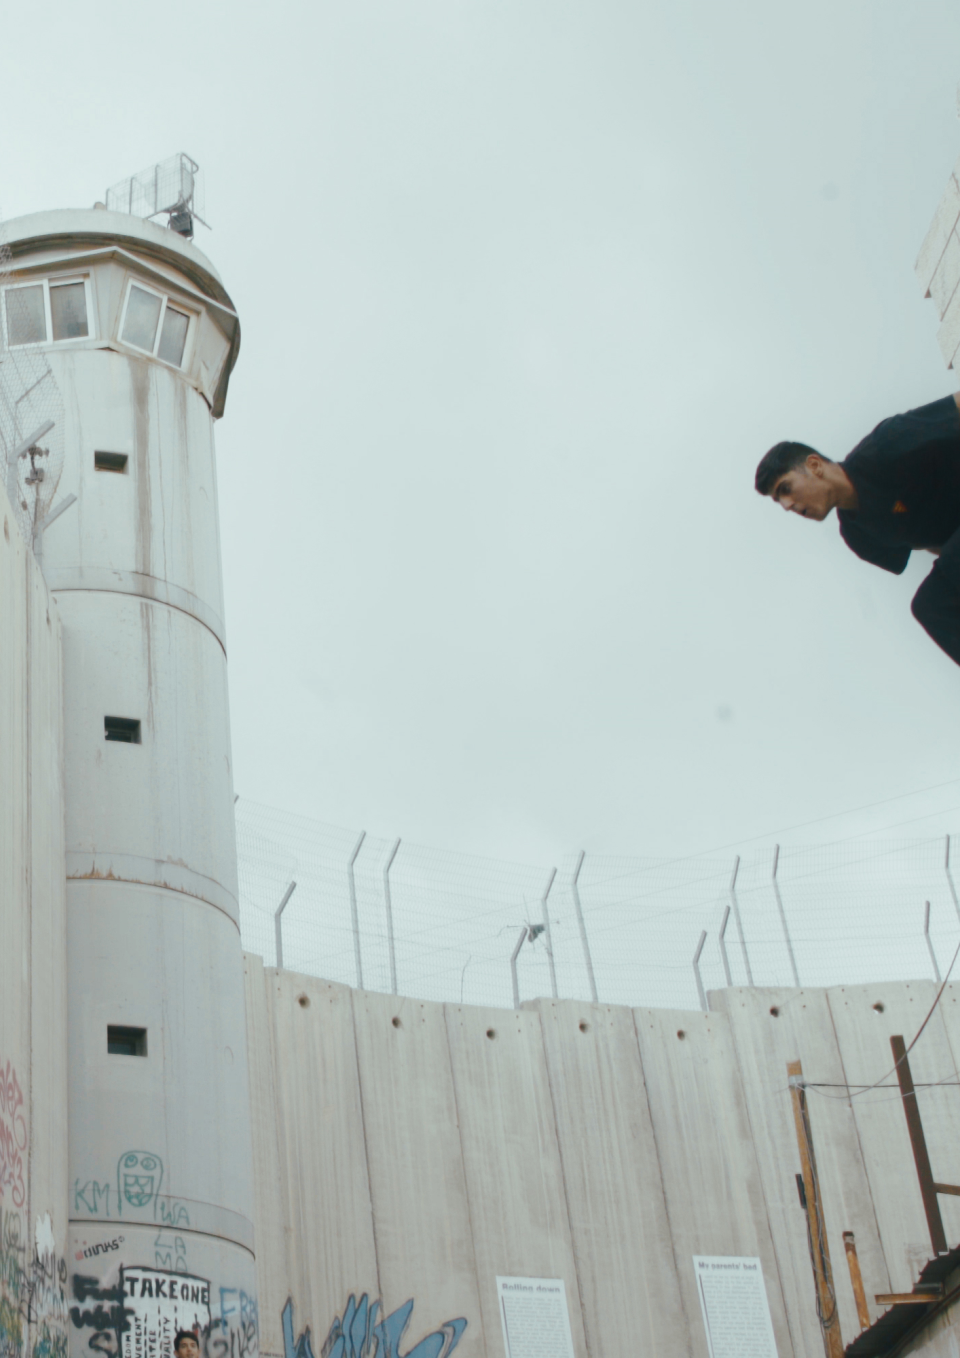 A young Palestinian man about to jump from one building to another.